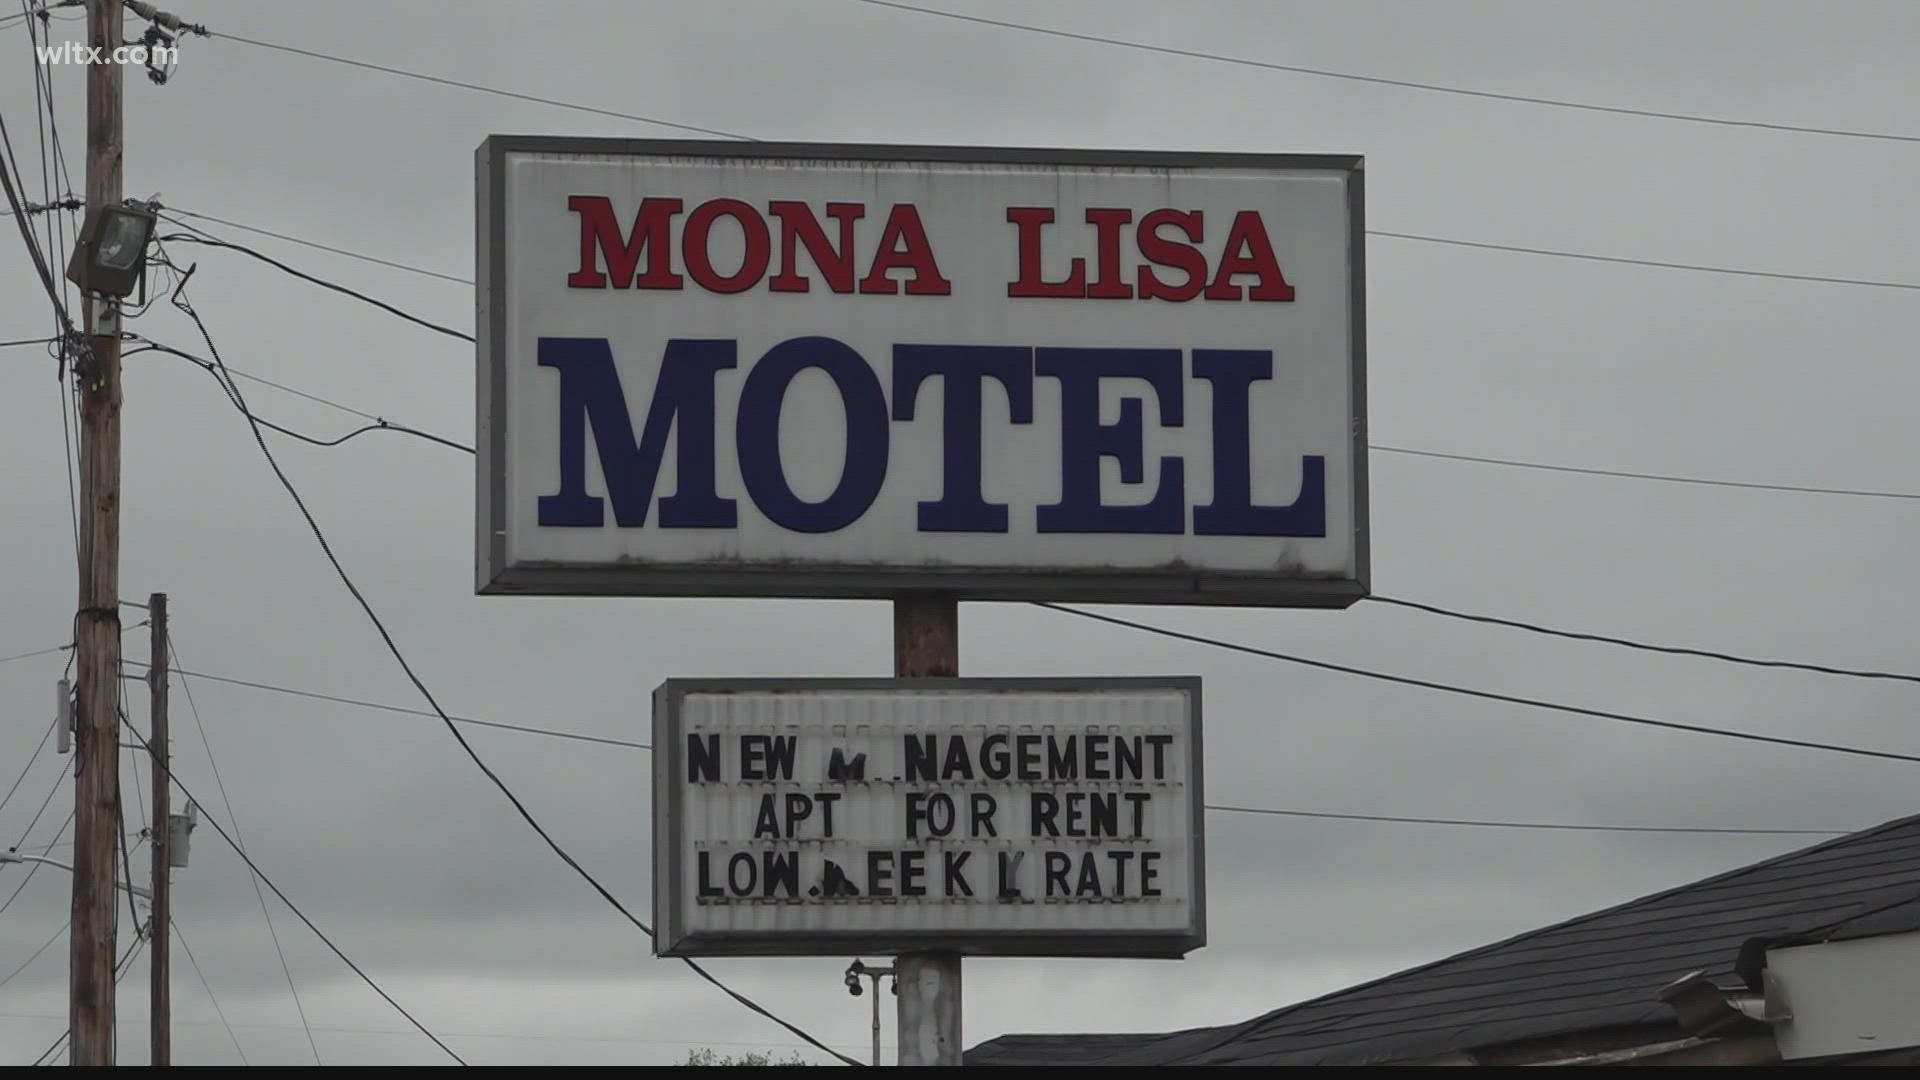 The Camden City Council voted last week to close the Deluxe Inn and Mona Lisa Motel in Downtown Camden.